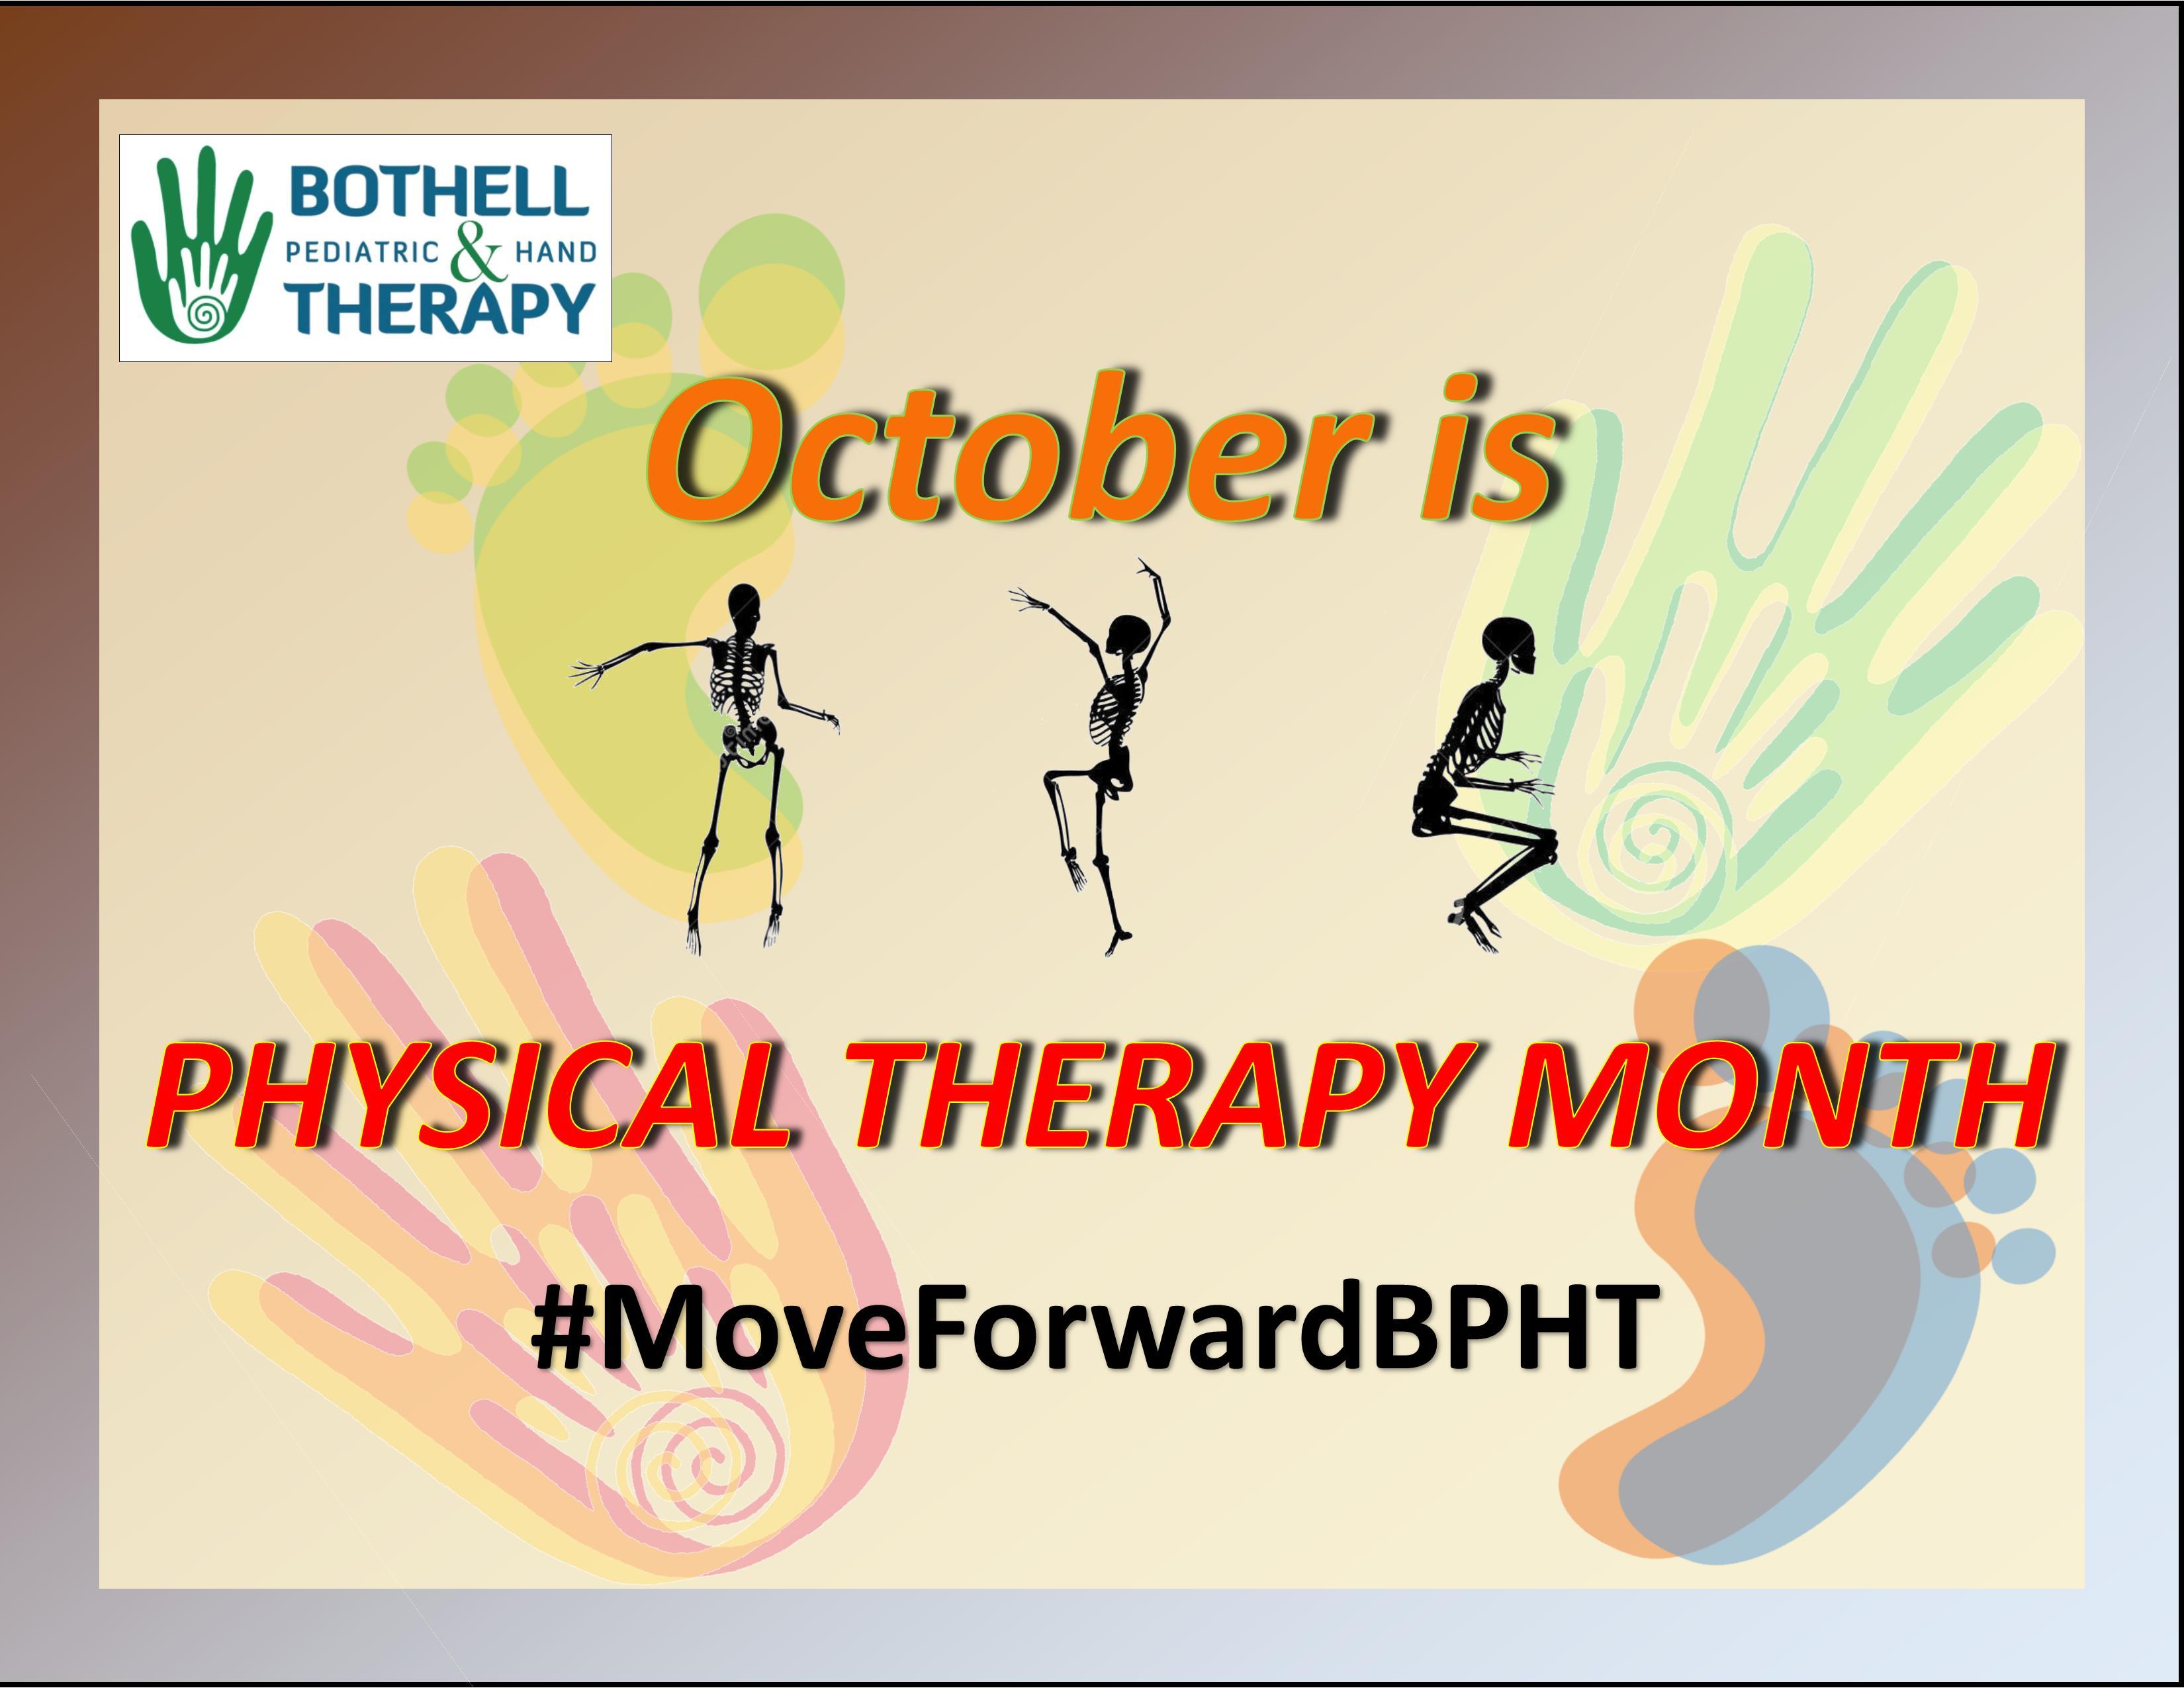 PT Month Logo - Benefits of Yoga with Ms. Angela - Bothell Pediatric & Hand Therapy